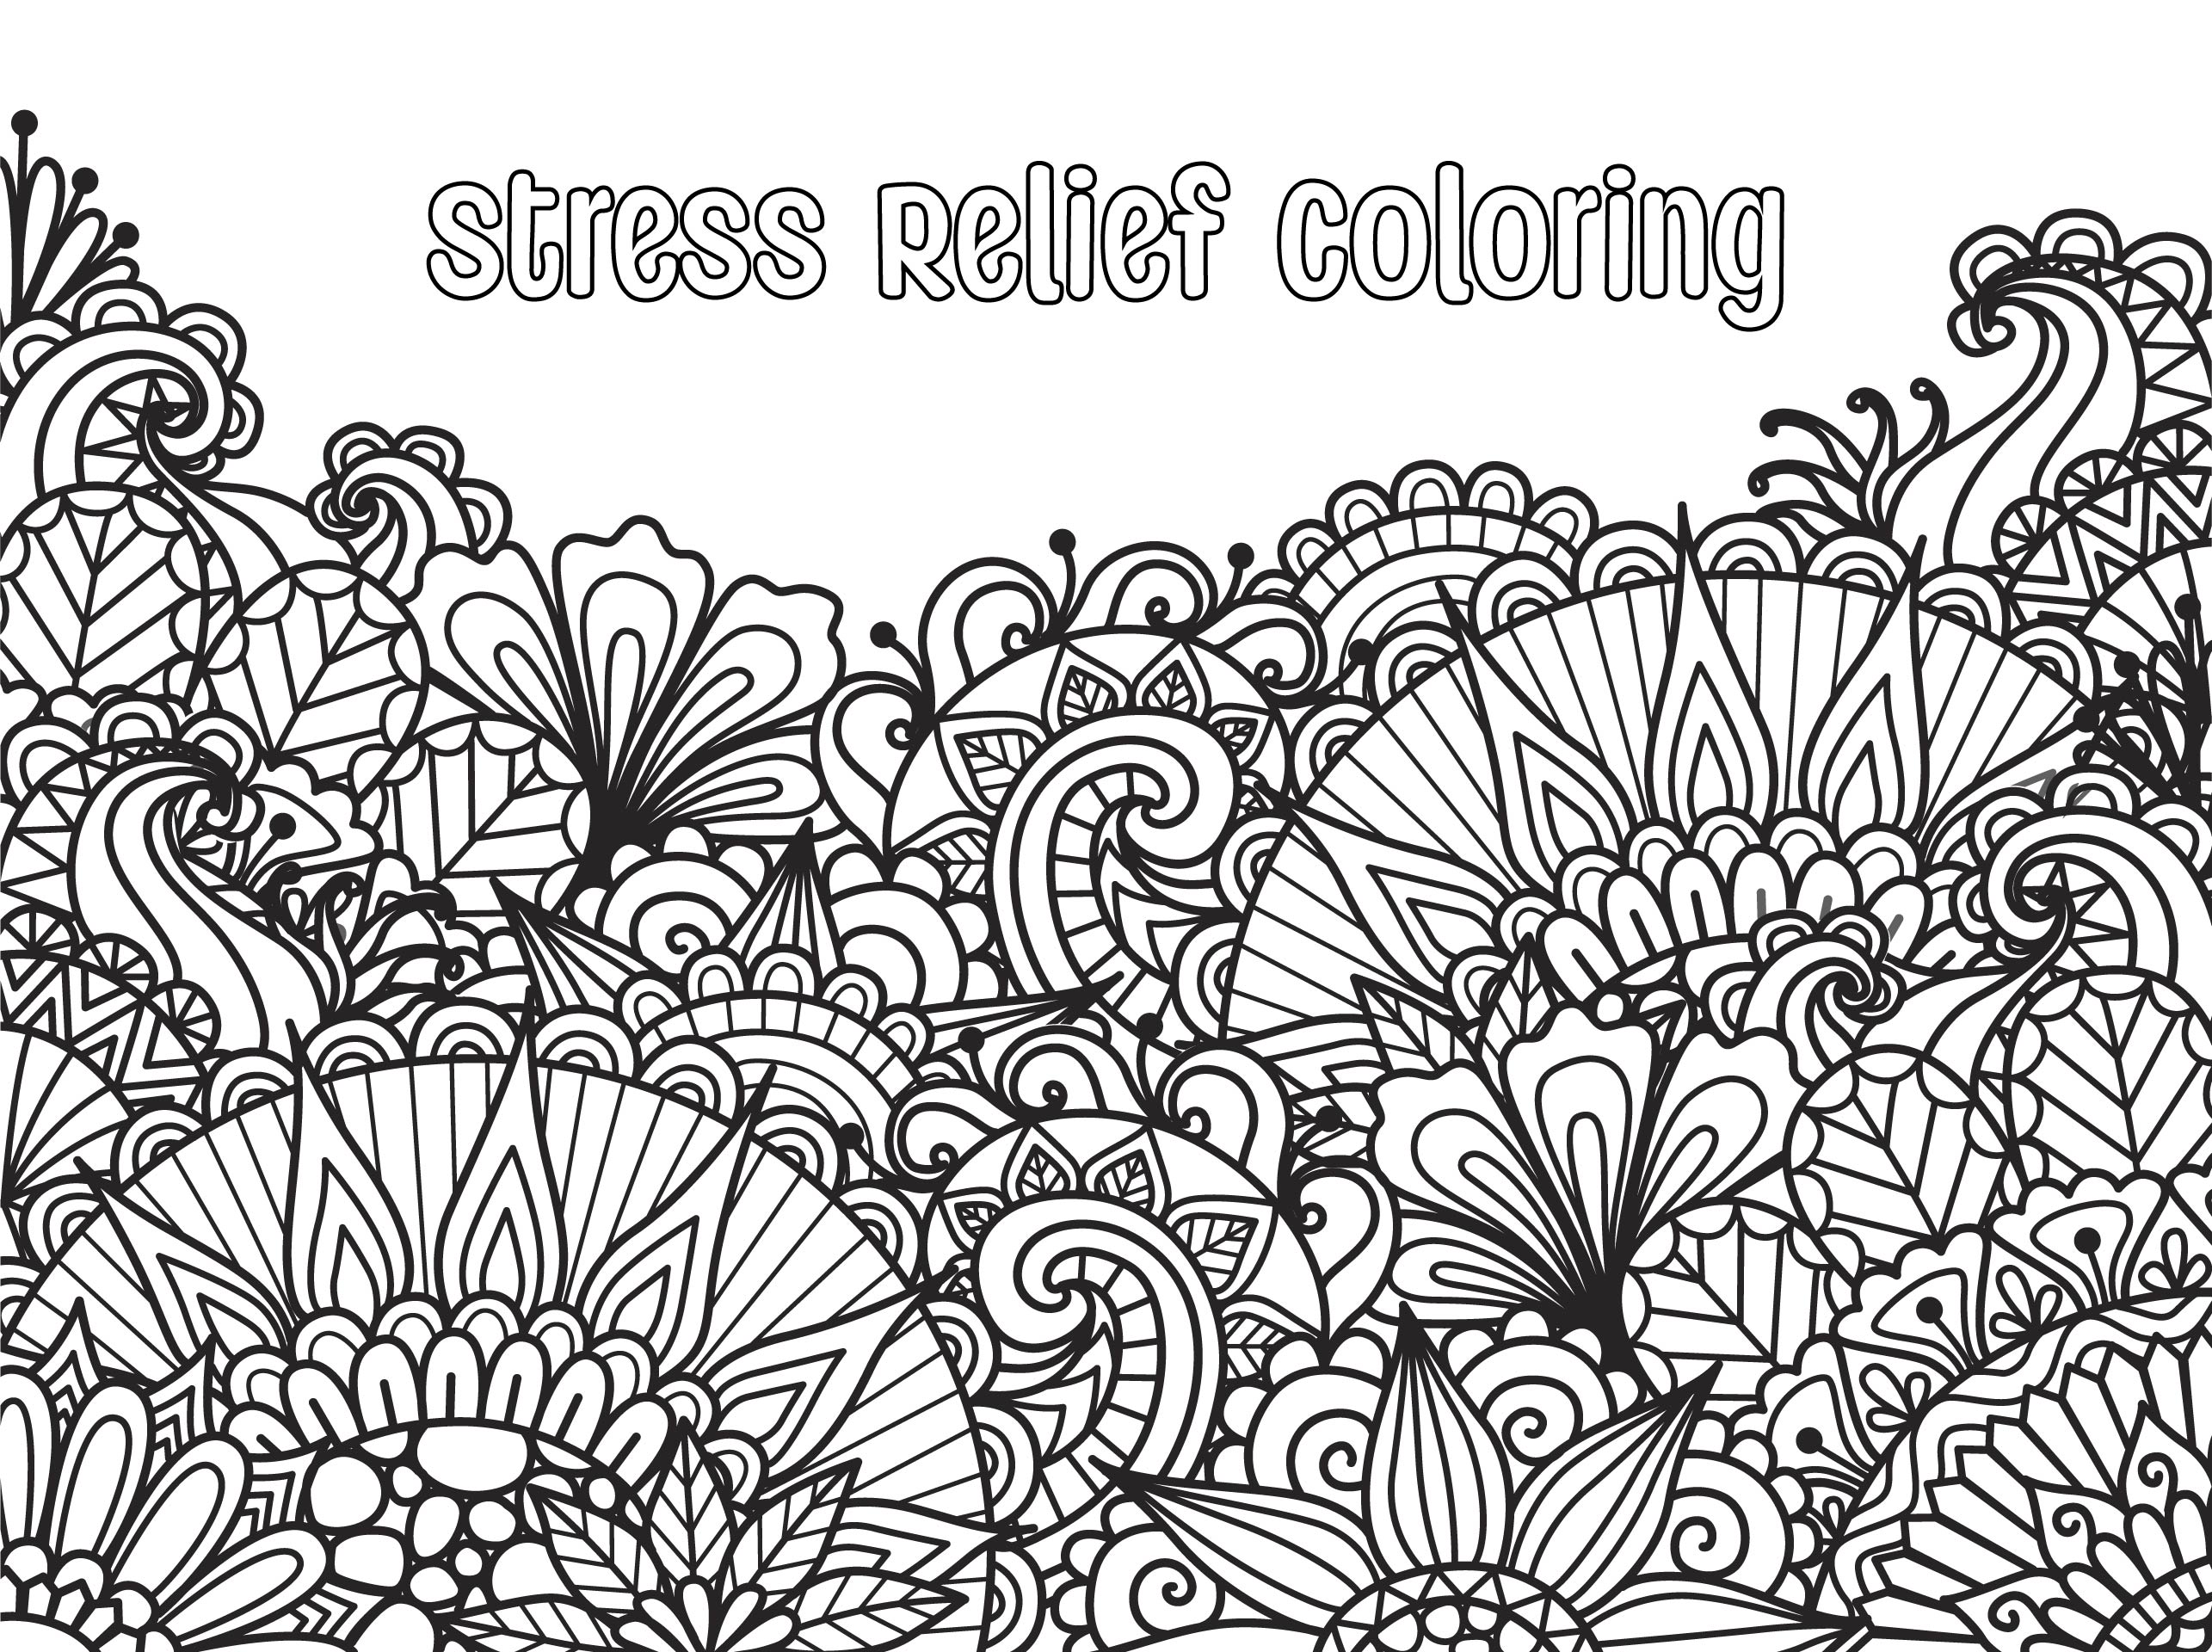 Printable Stress Relief Coloring Pages For Adults